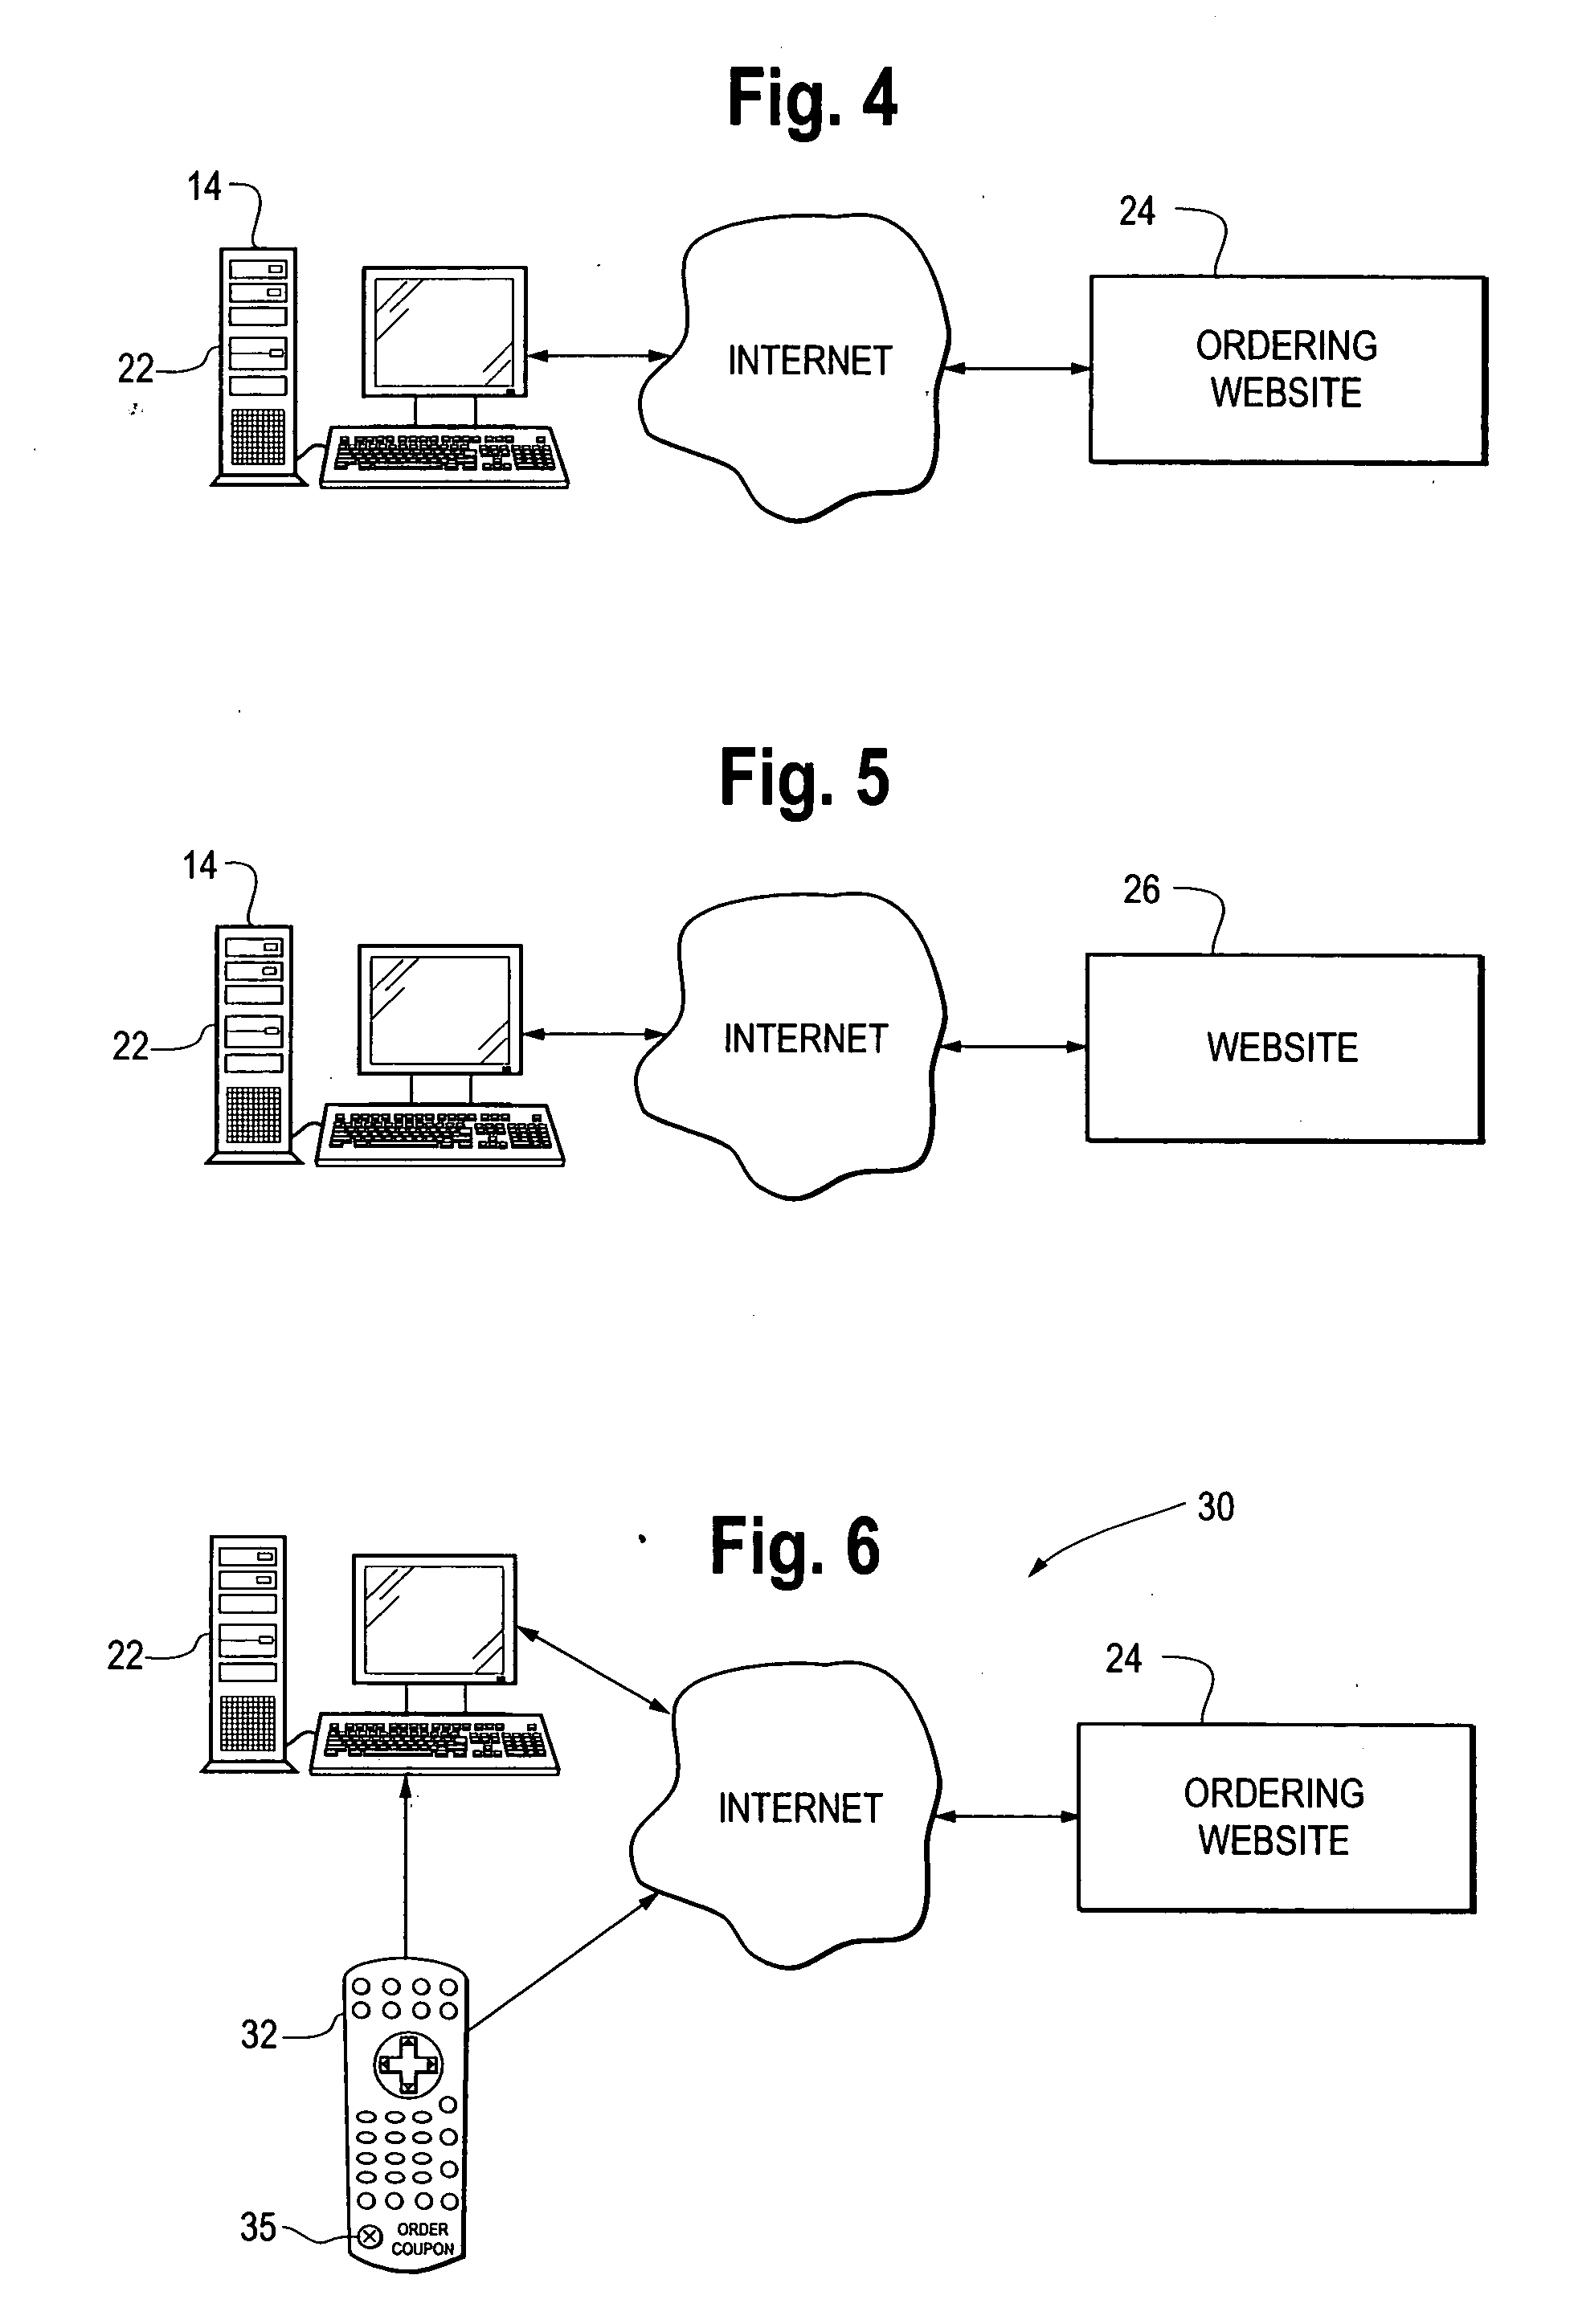 Systems and methods for the identification and/or distribution of music and other forms of useful information